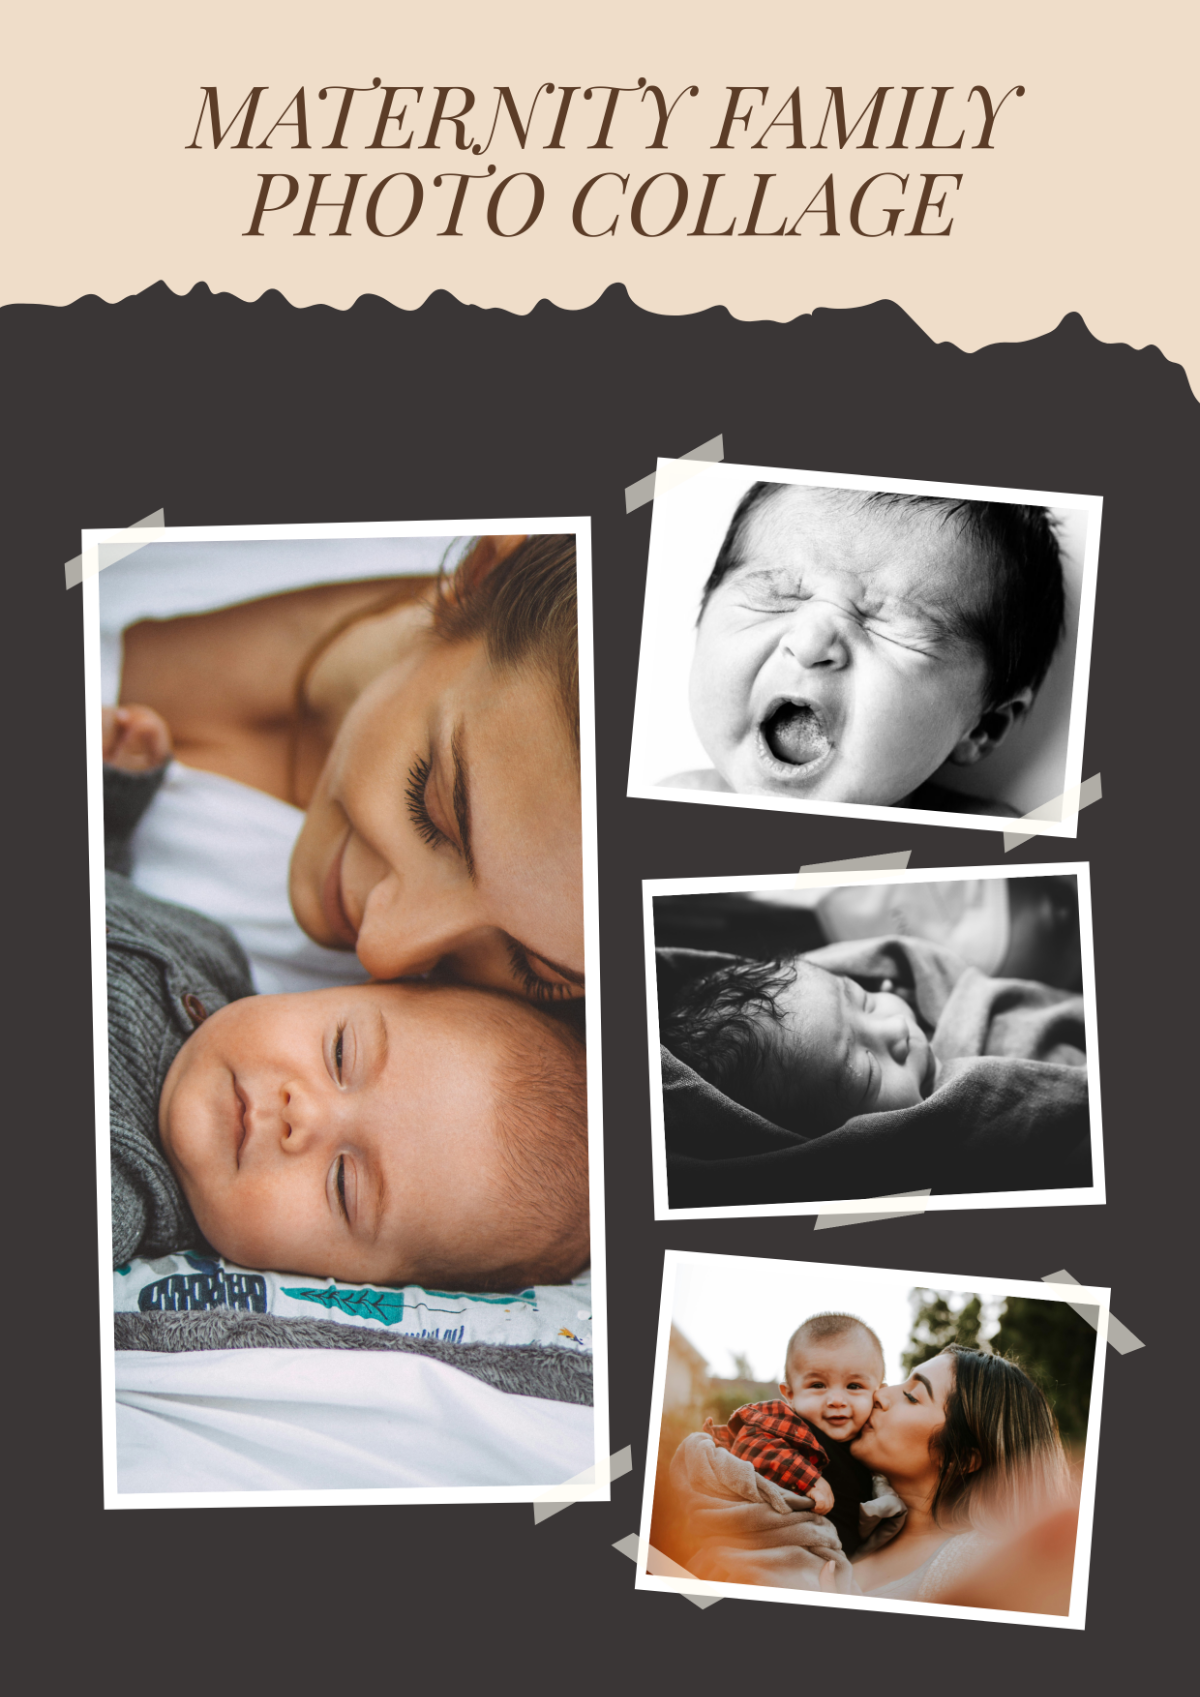 Maternity Family Photo Collage Template